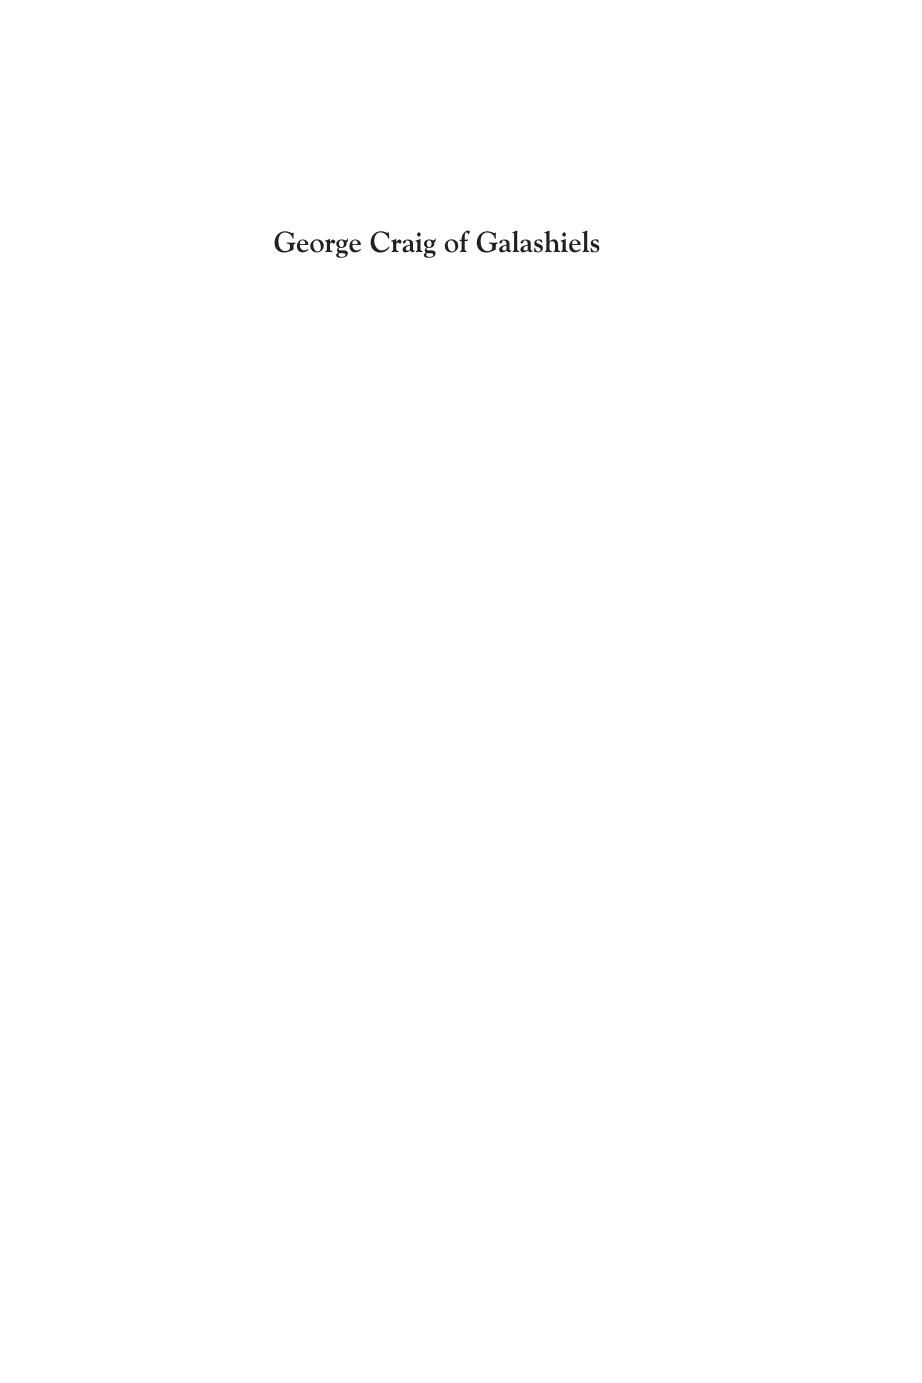 George Craig of Galashiels: The Life and Work of a Nineteenth Century Lawyer by John Finlay